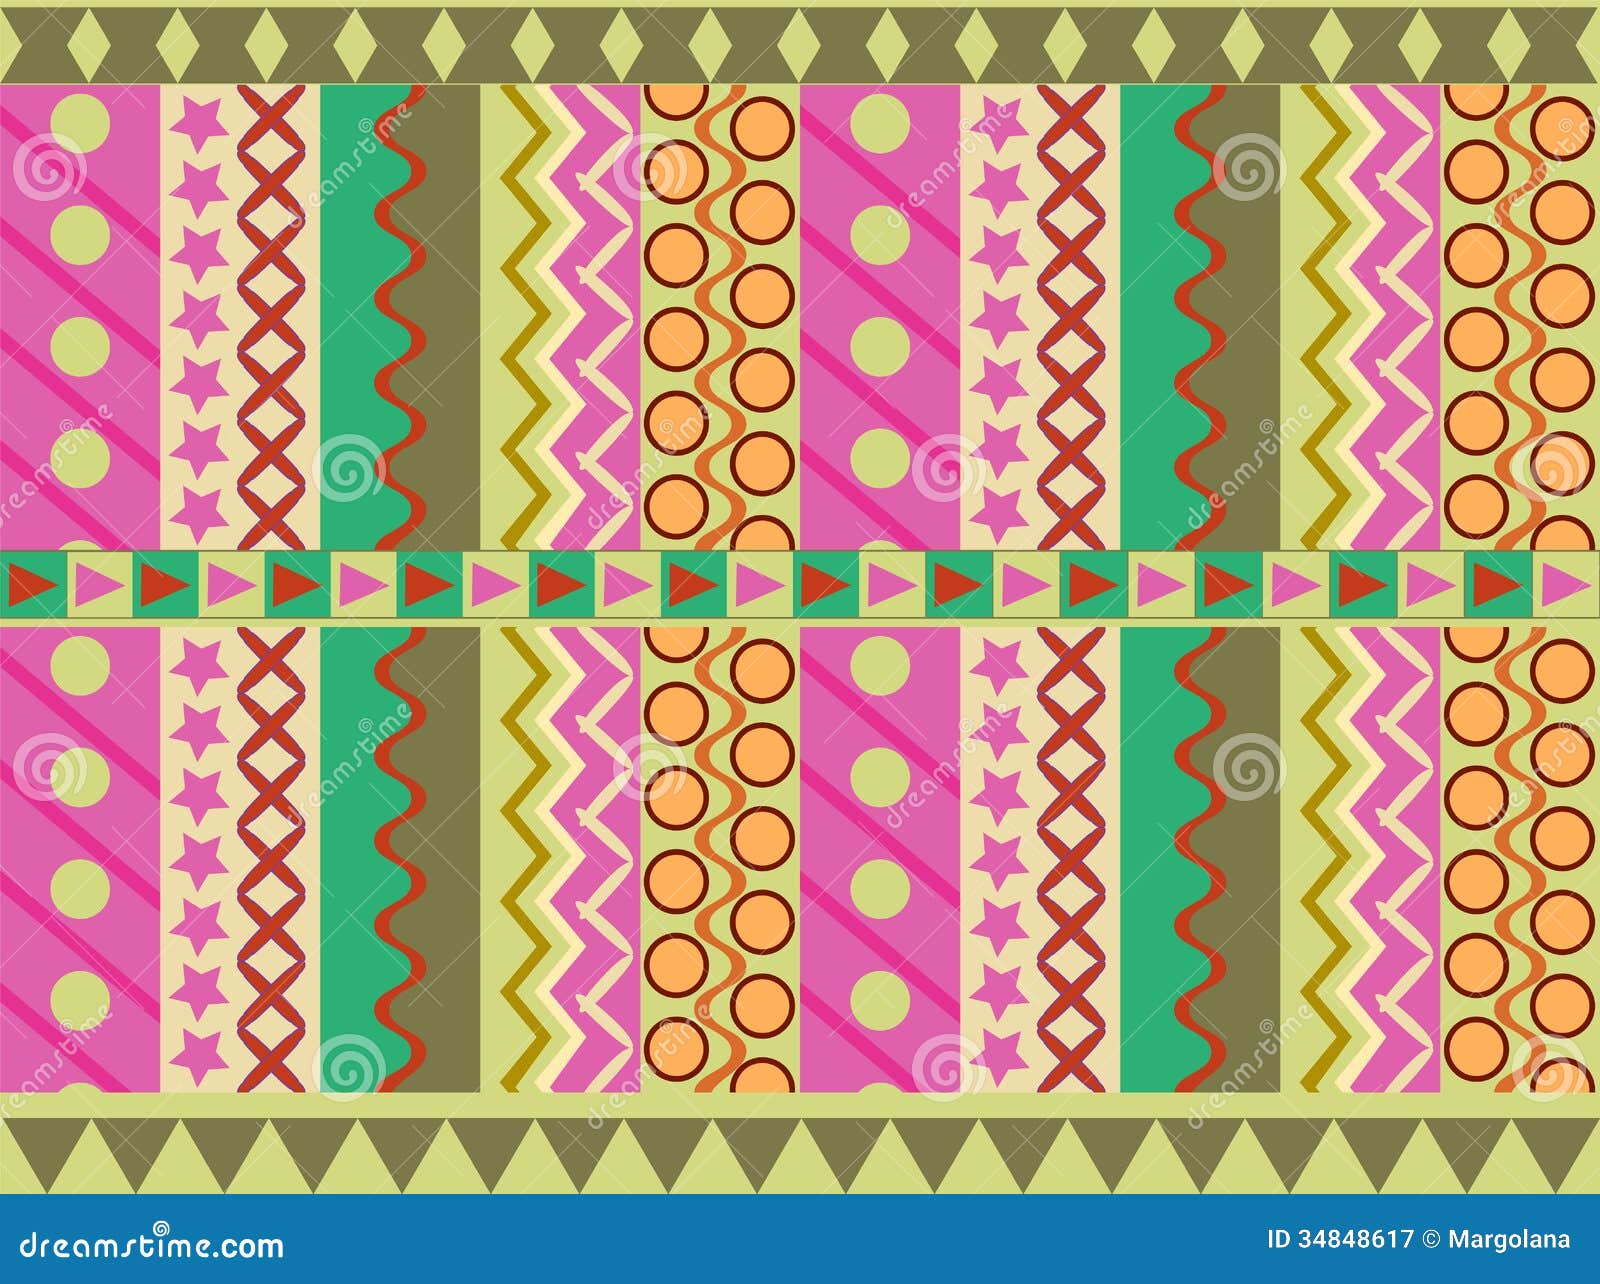 Geometric cheerful pattern stock vector. Illustration of holiday - 34848617